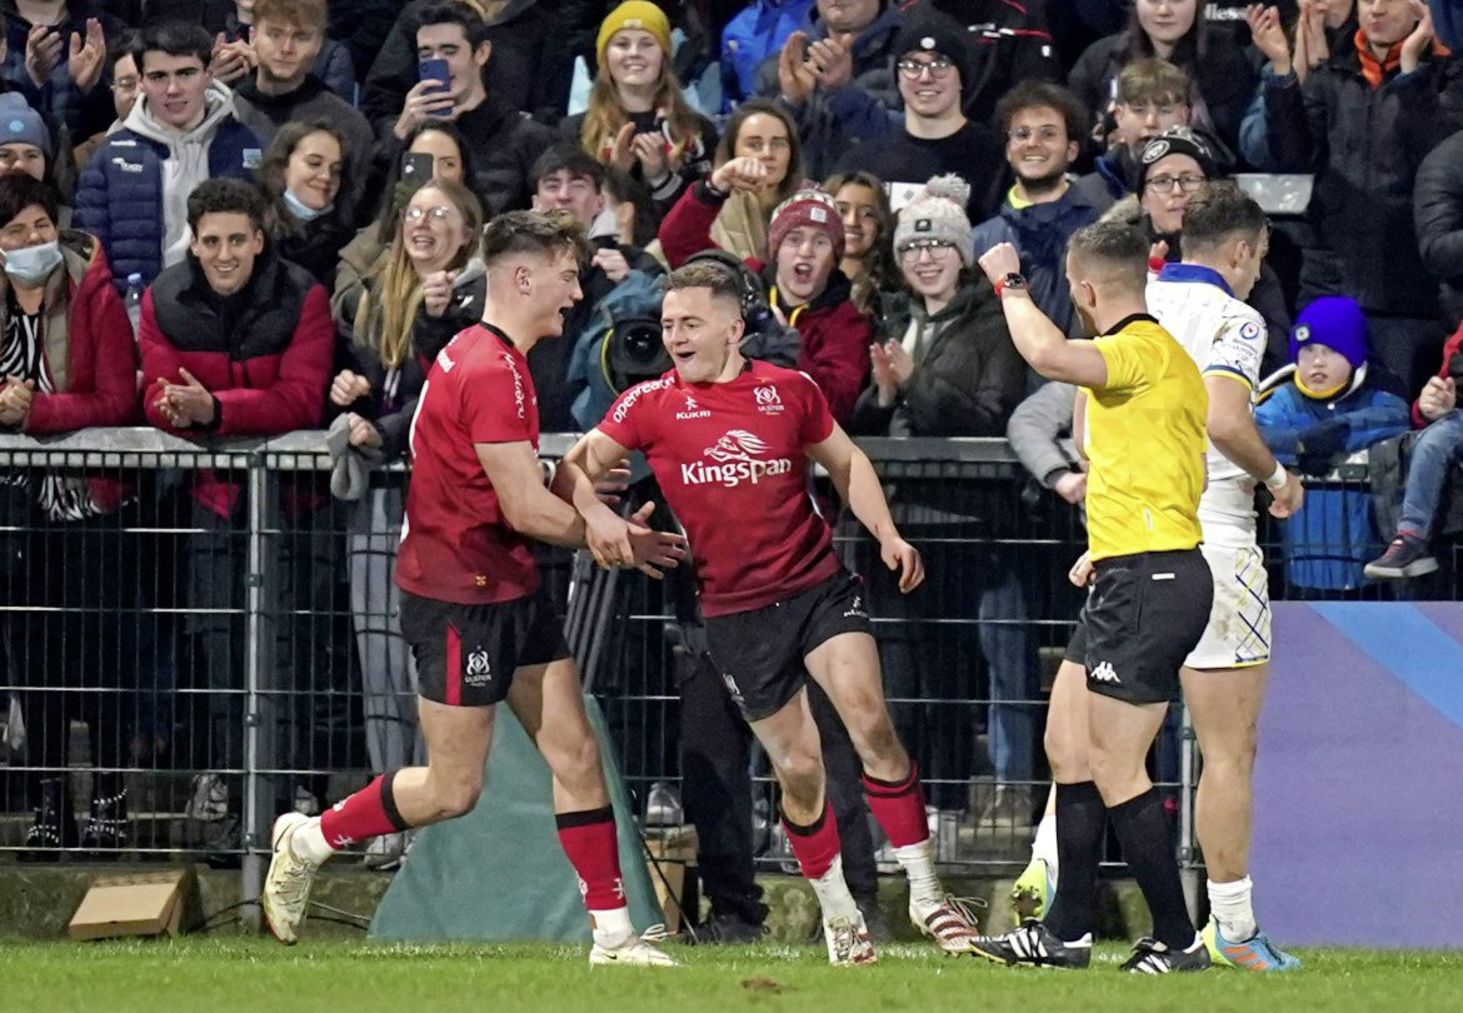 Michael Lowry scored a first half try for Ulster in their win over Leinster in the United Rugby Championship clash at Kingspan Stadium on Friday night 